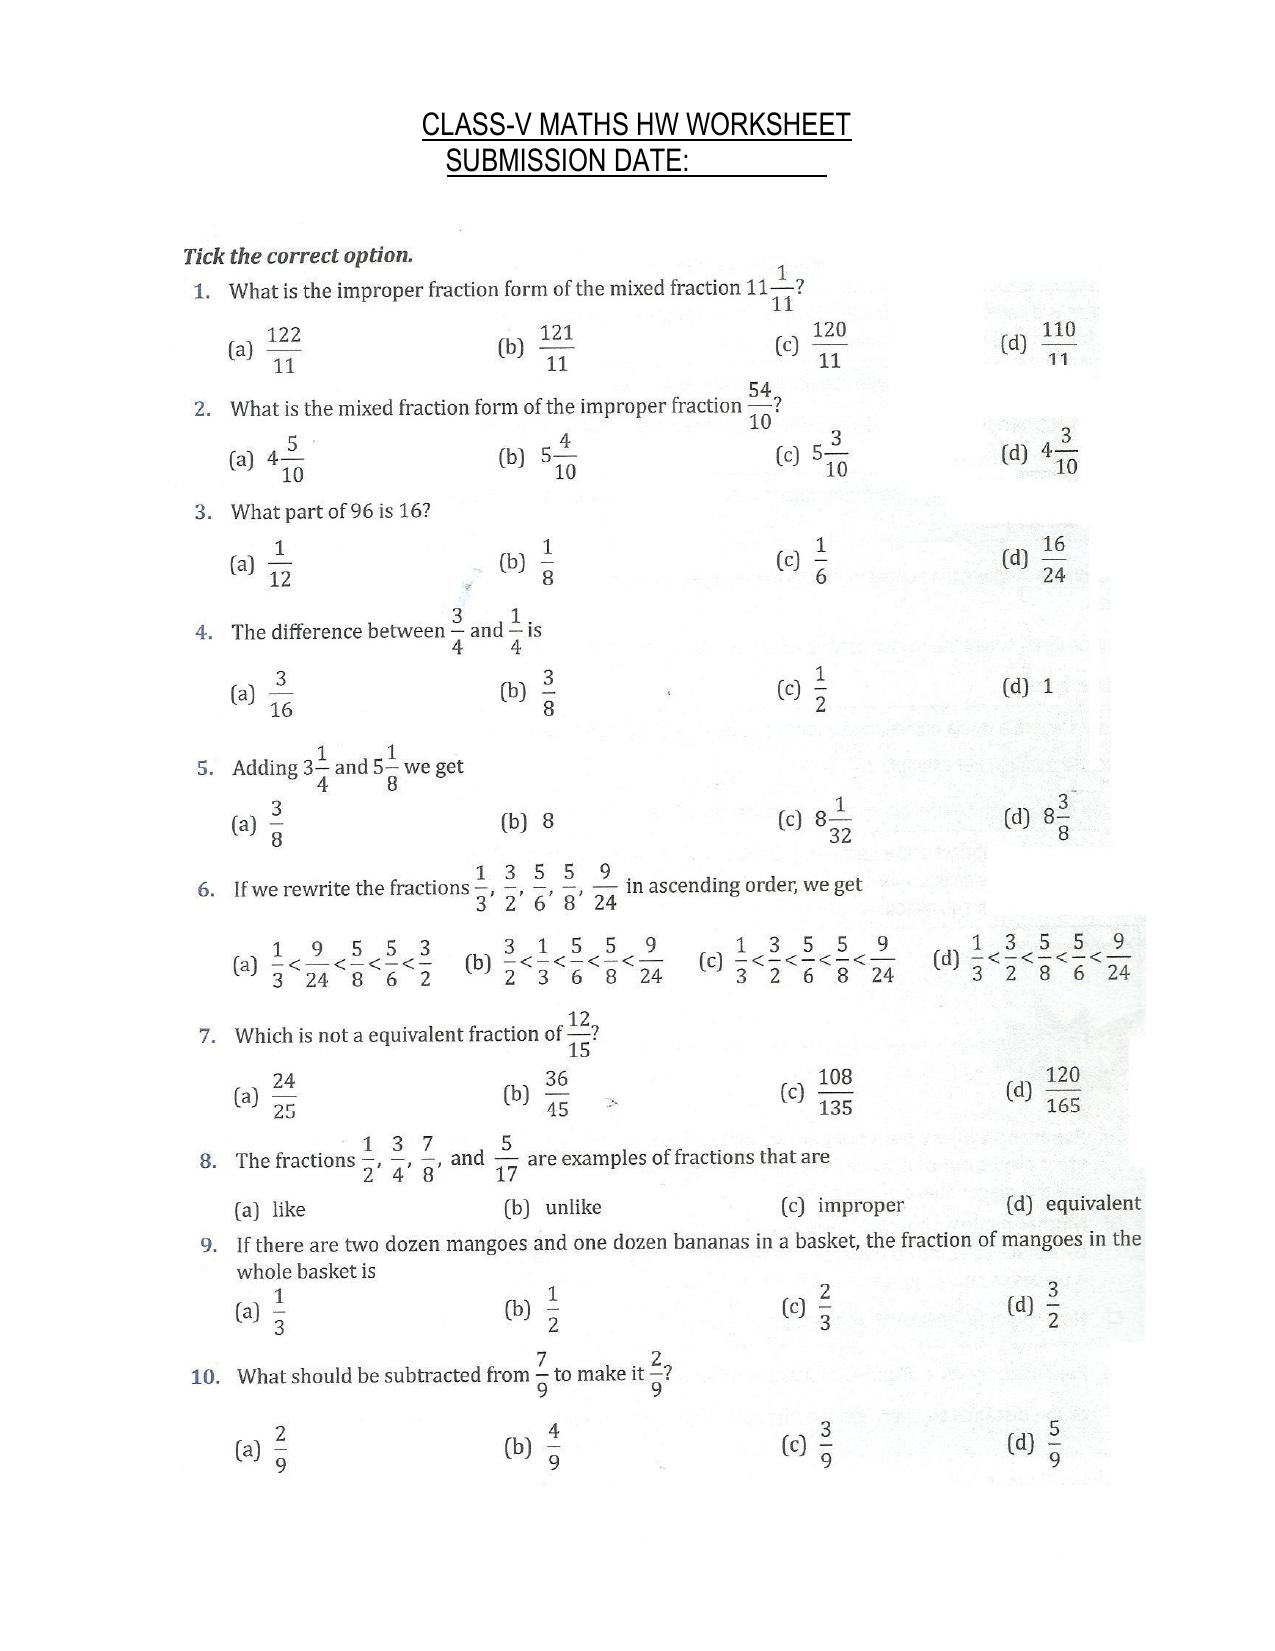 Worksheet for Class 5 Maths Factors Assignment 2 - Page 1